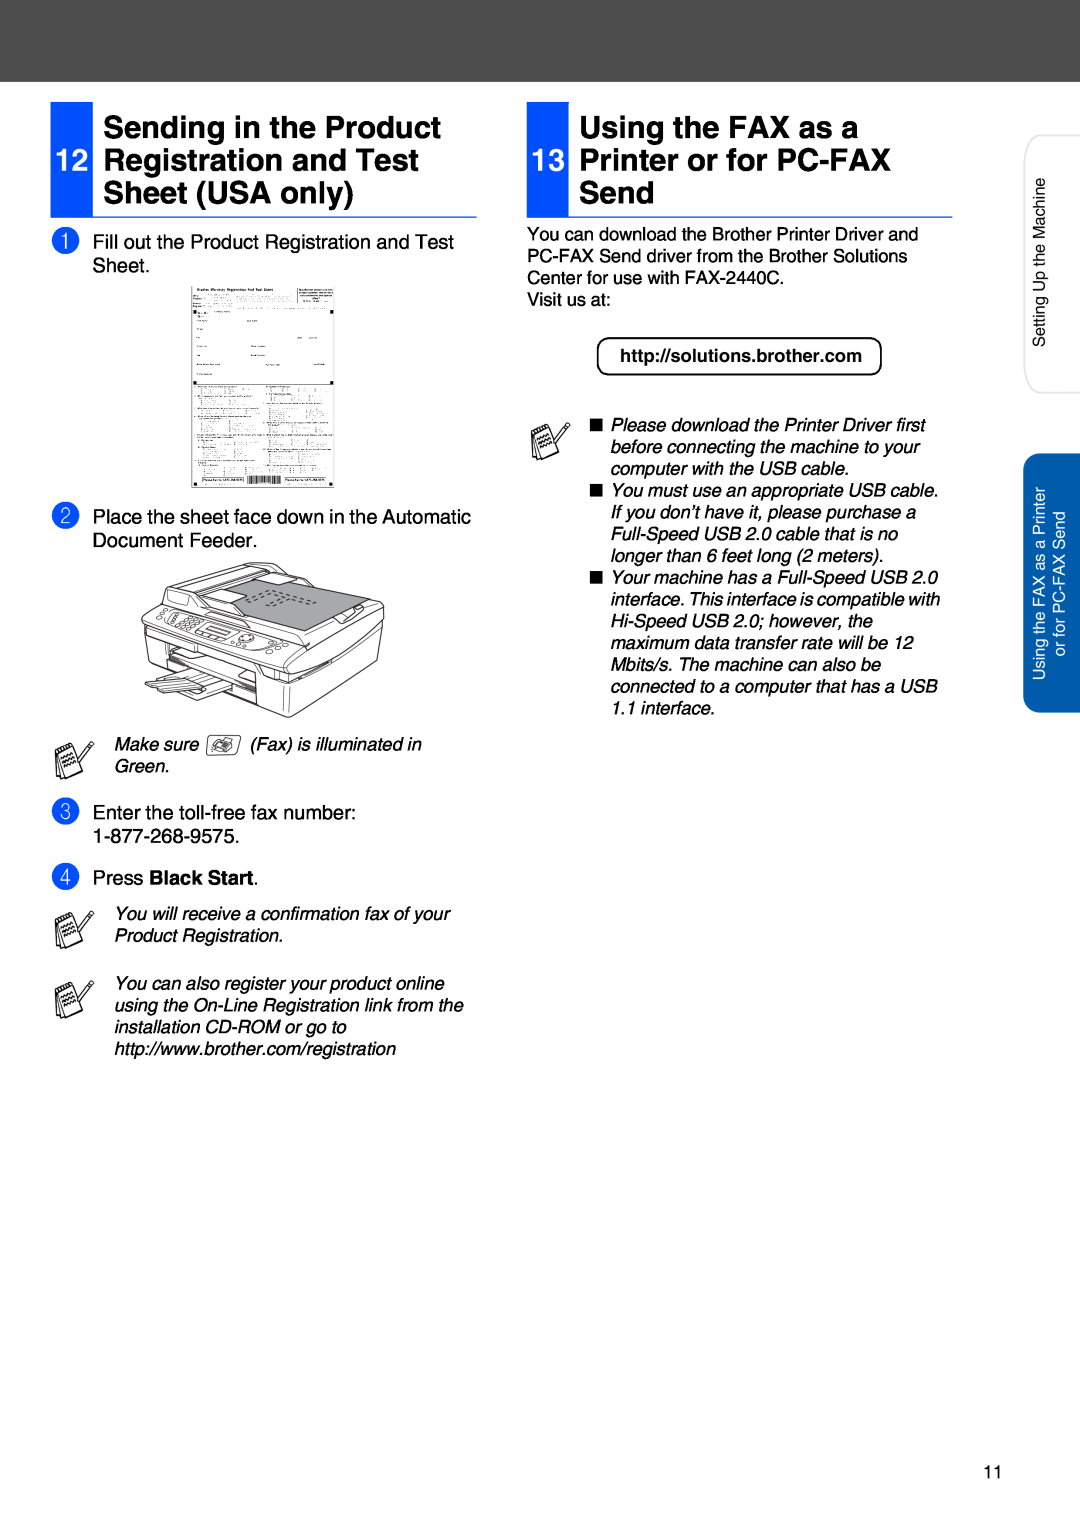 Brother FAX-2440C setup guide Sending in the Product, Using the FAX as a 13 Printer or for PC-FAX Send, Press Black Start 